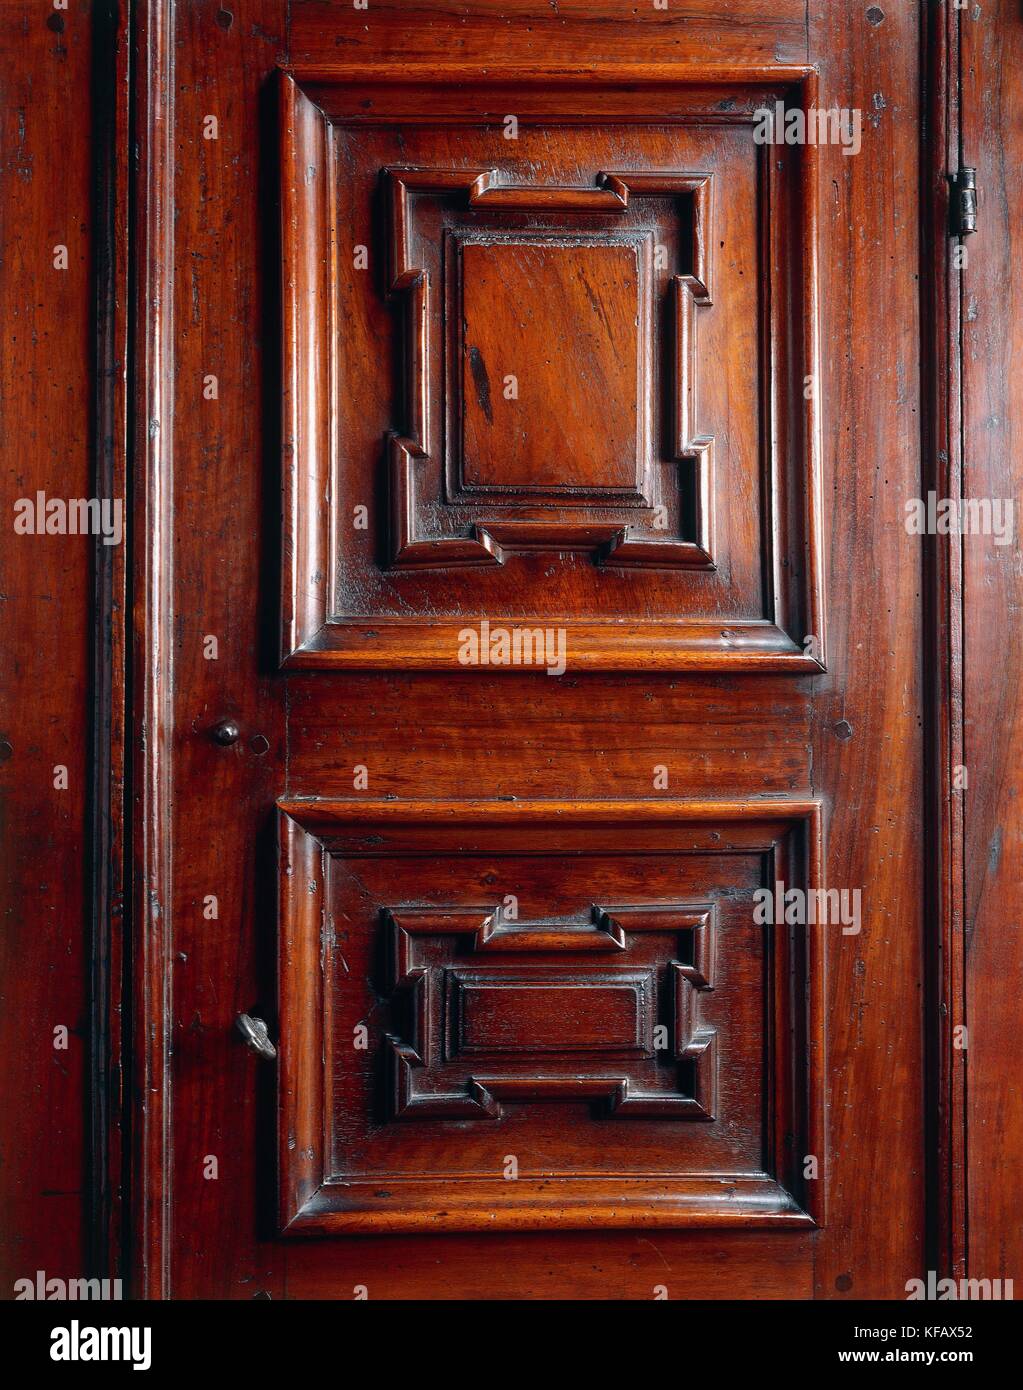 Italian, seventeenth century. Cabinet in walnut with inlays of maple production in Lombardy. First half of the seventeenth century. Particular. Stock Photo